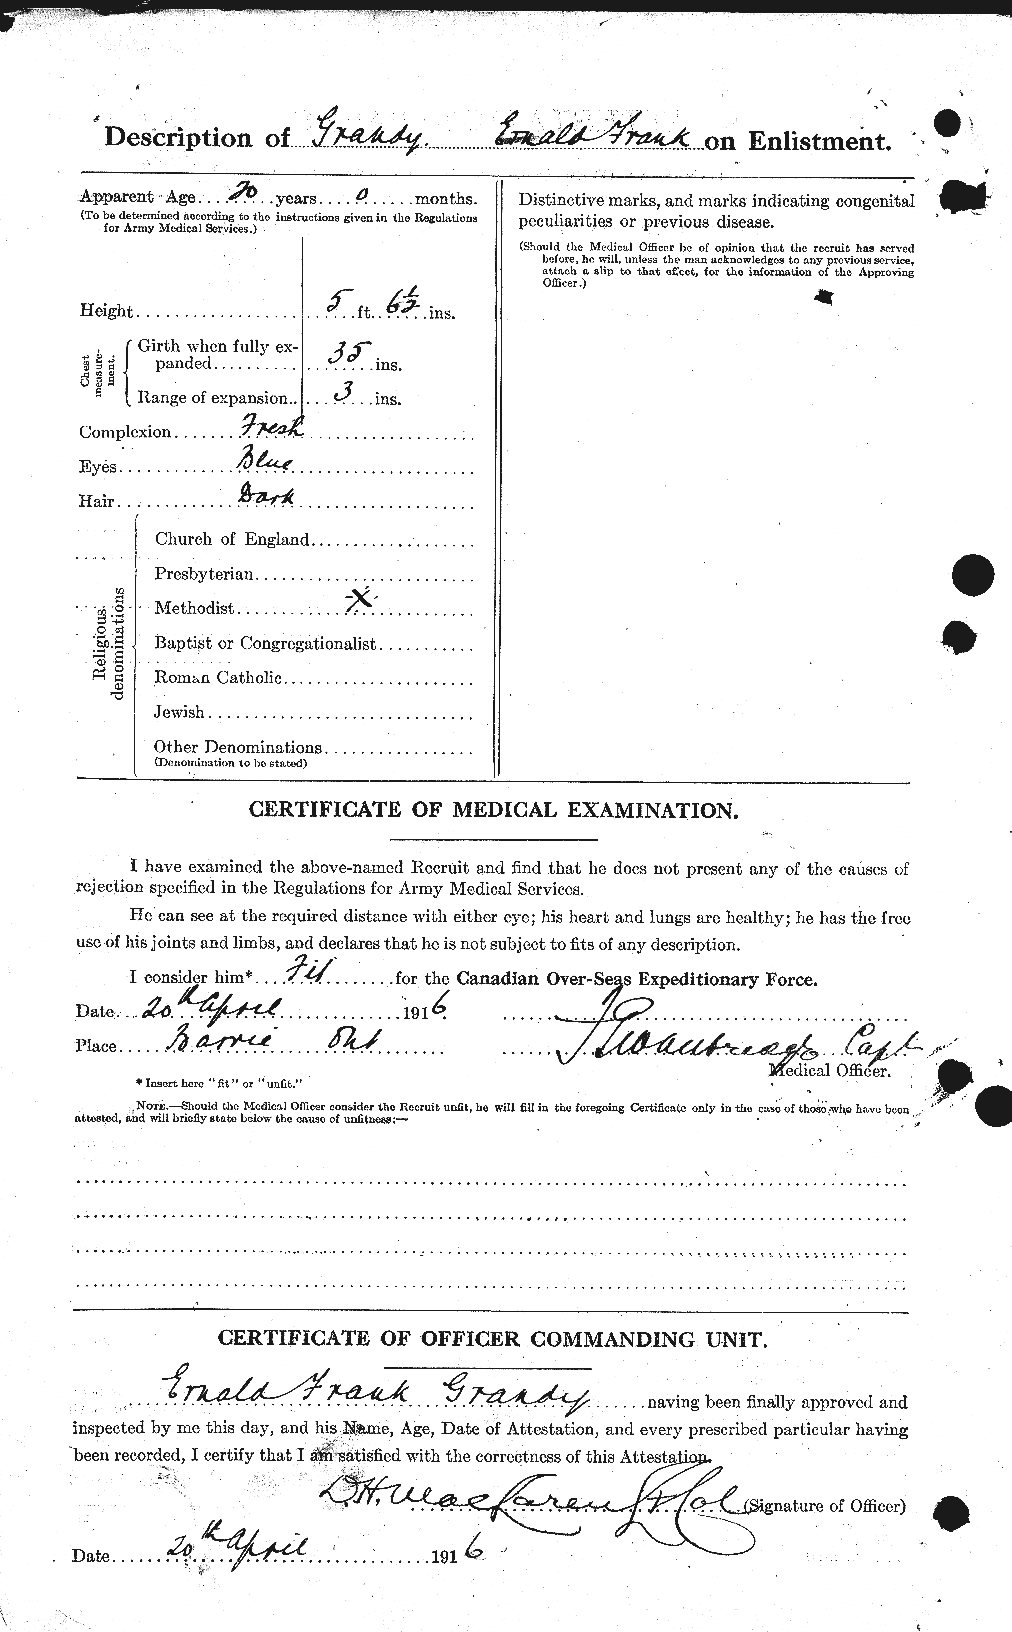 Personnel Records of the First World War - CEF 359056b